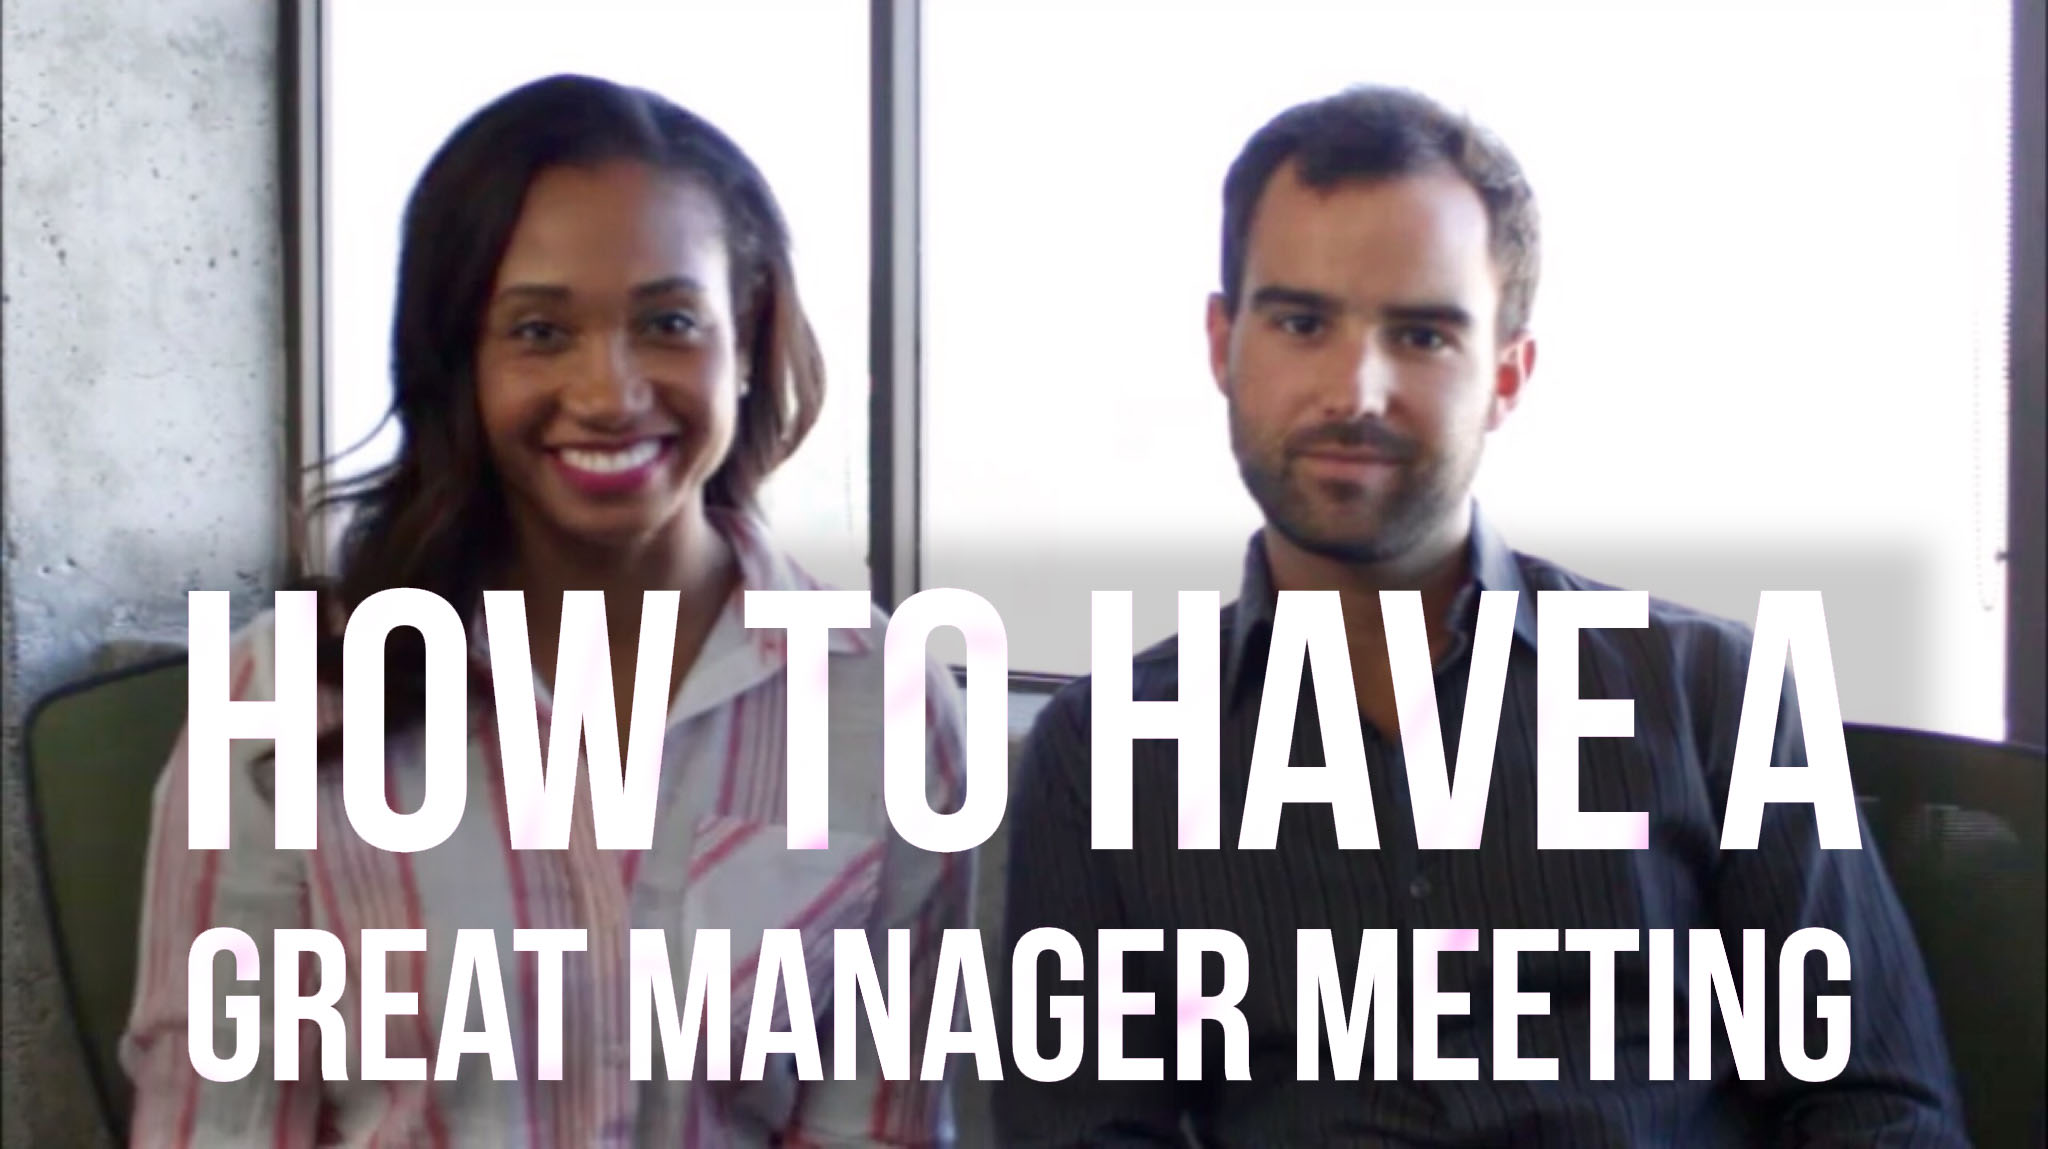 How To Have A Great Manager Meeting | #ManagerSeries Vol. 2 | Workshop Guru